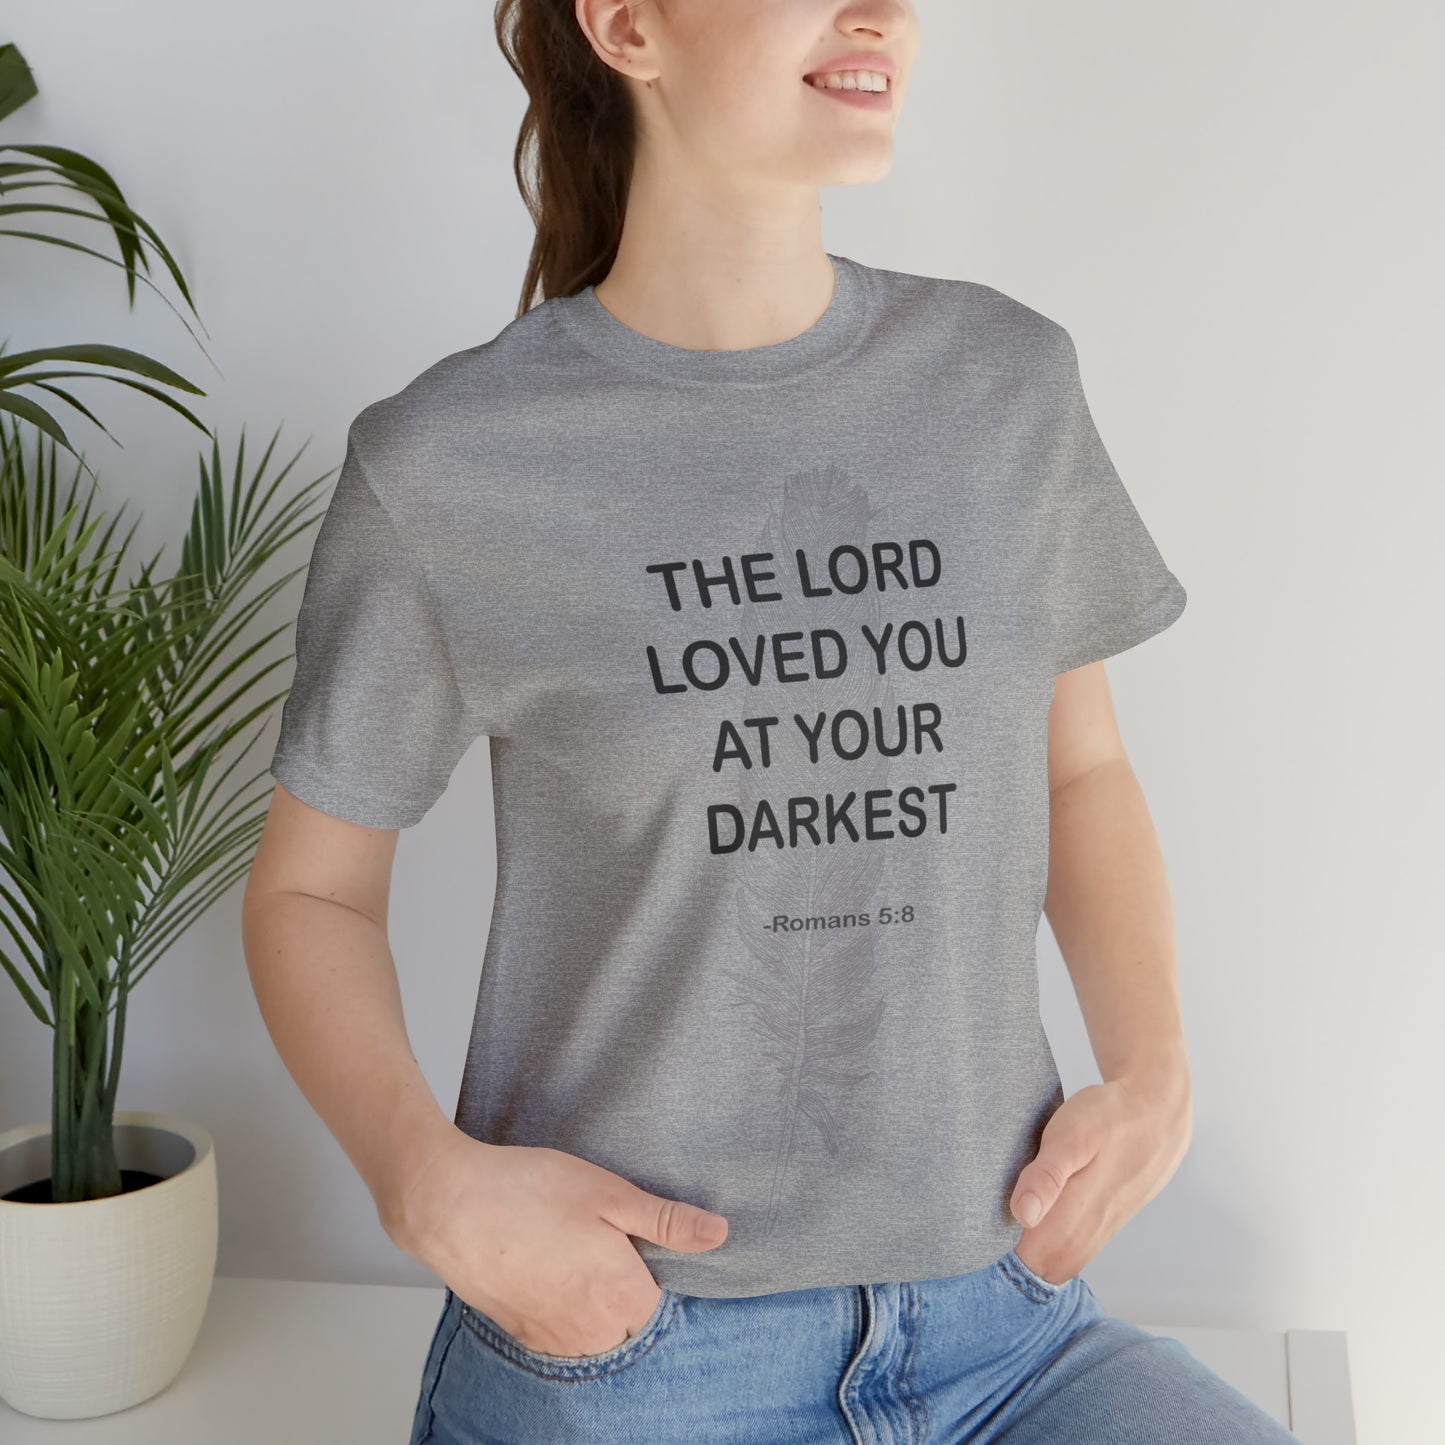 This shirt is the perfect way to share your faith with those around you and let them know that they are not alone in their struggles. With its simple and encouraging message, you can help lead someone to Christ.